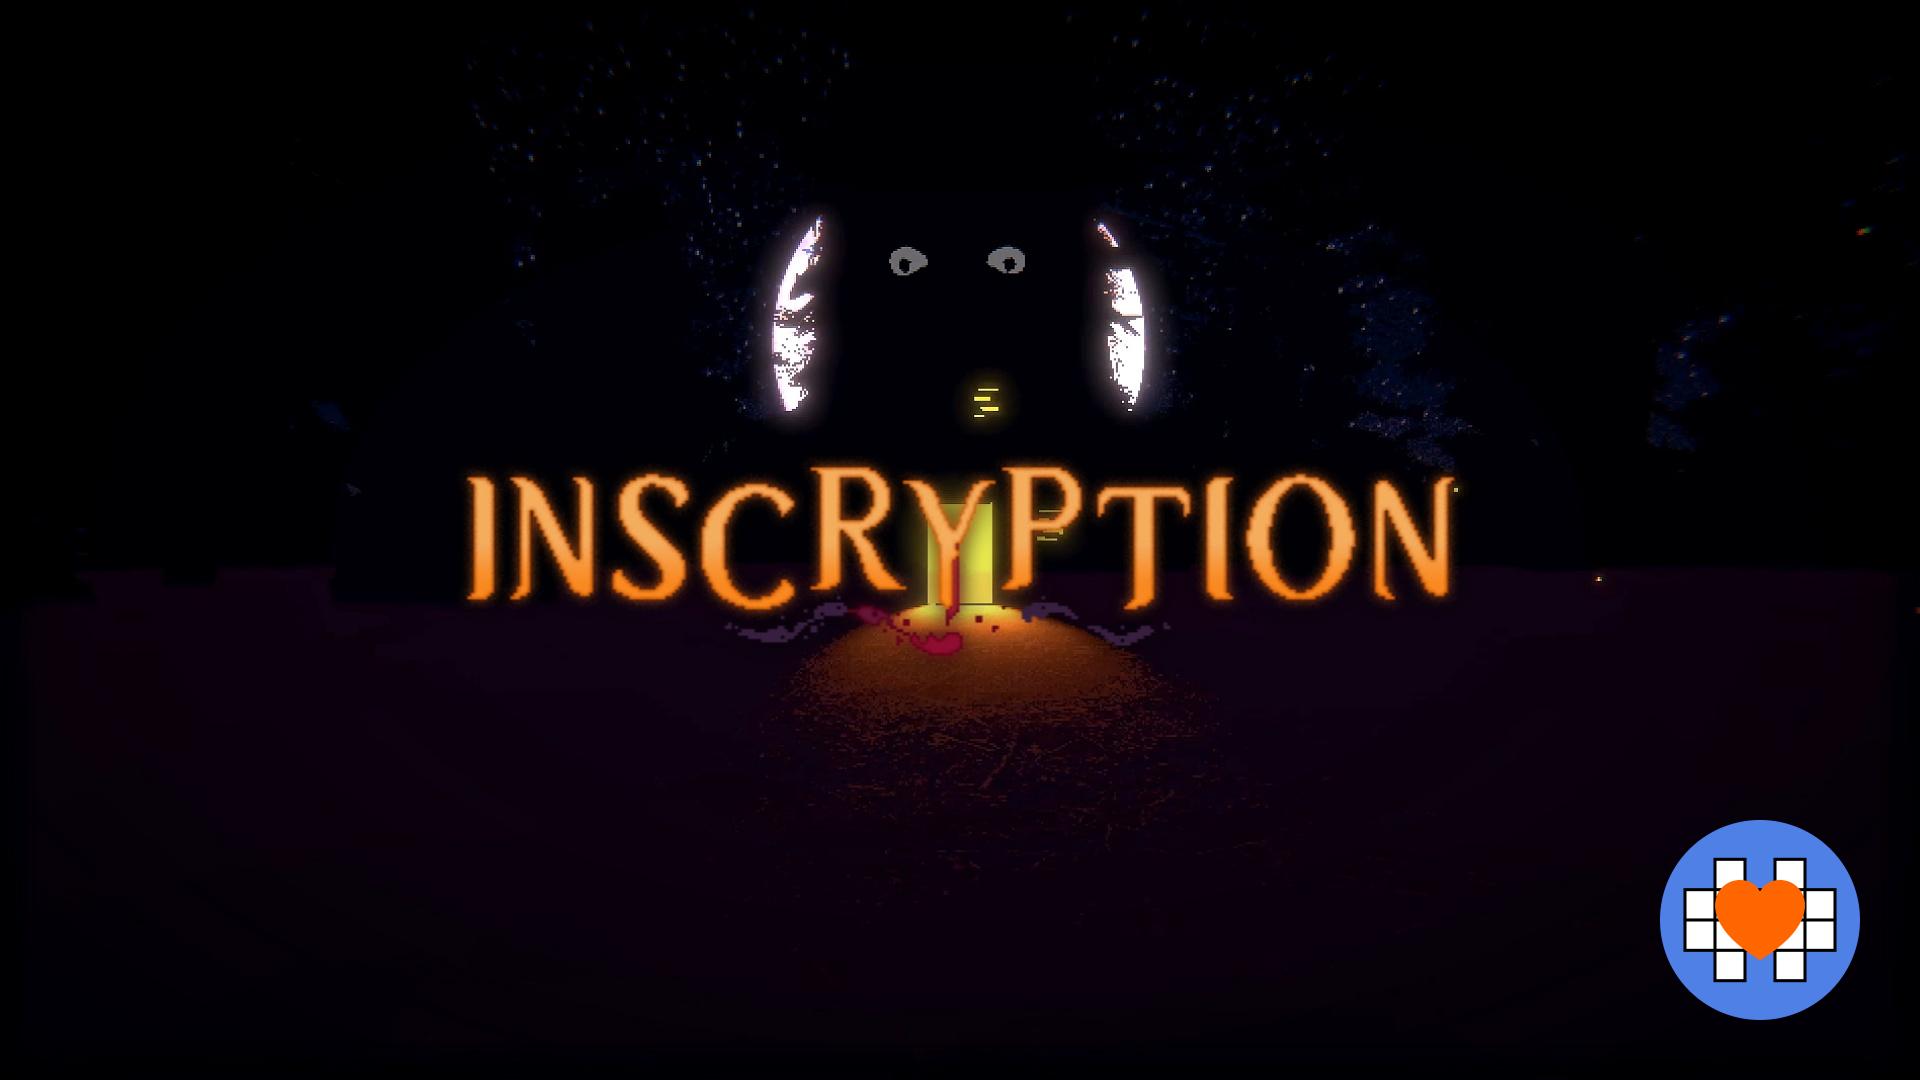 Presenting INSCRYPTION. Originally based on Sacrifices Must Be